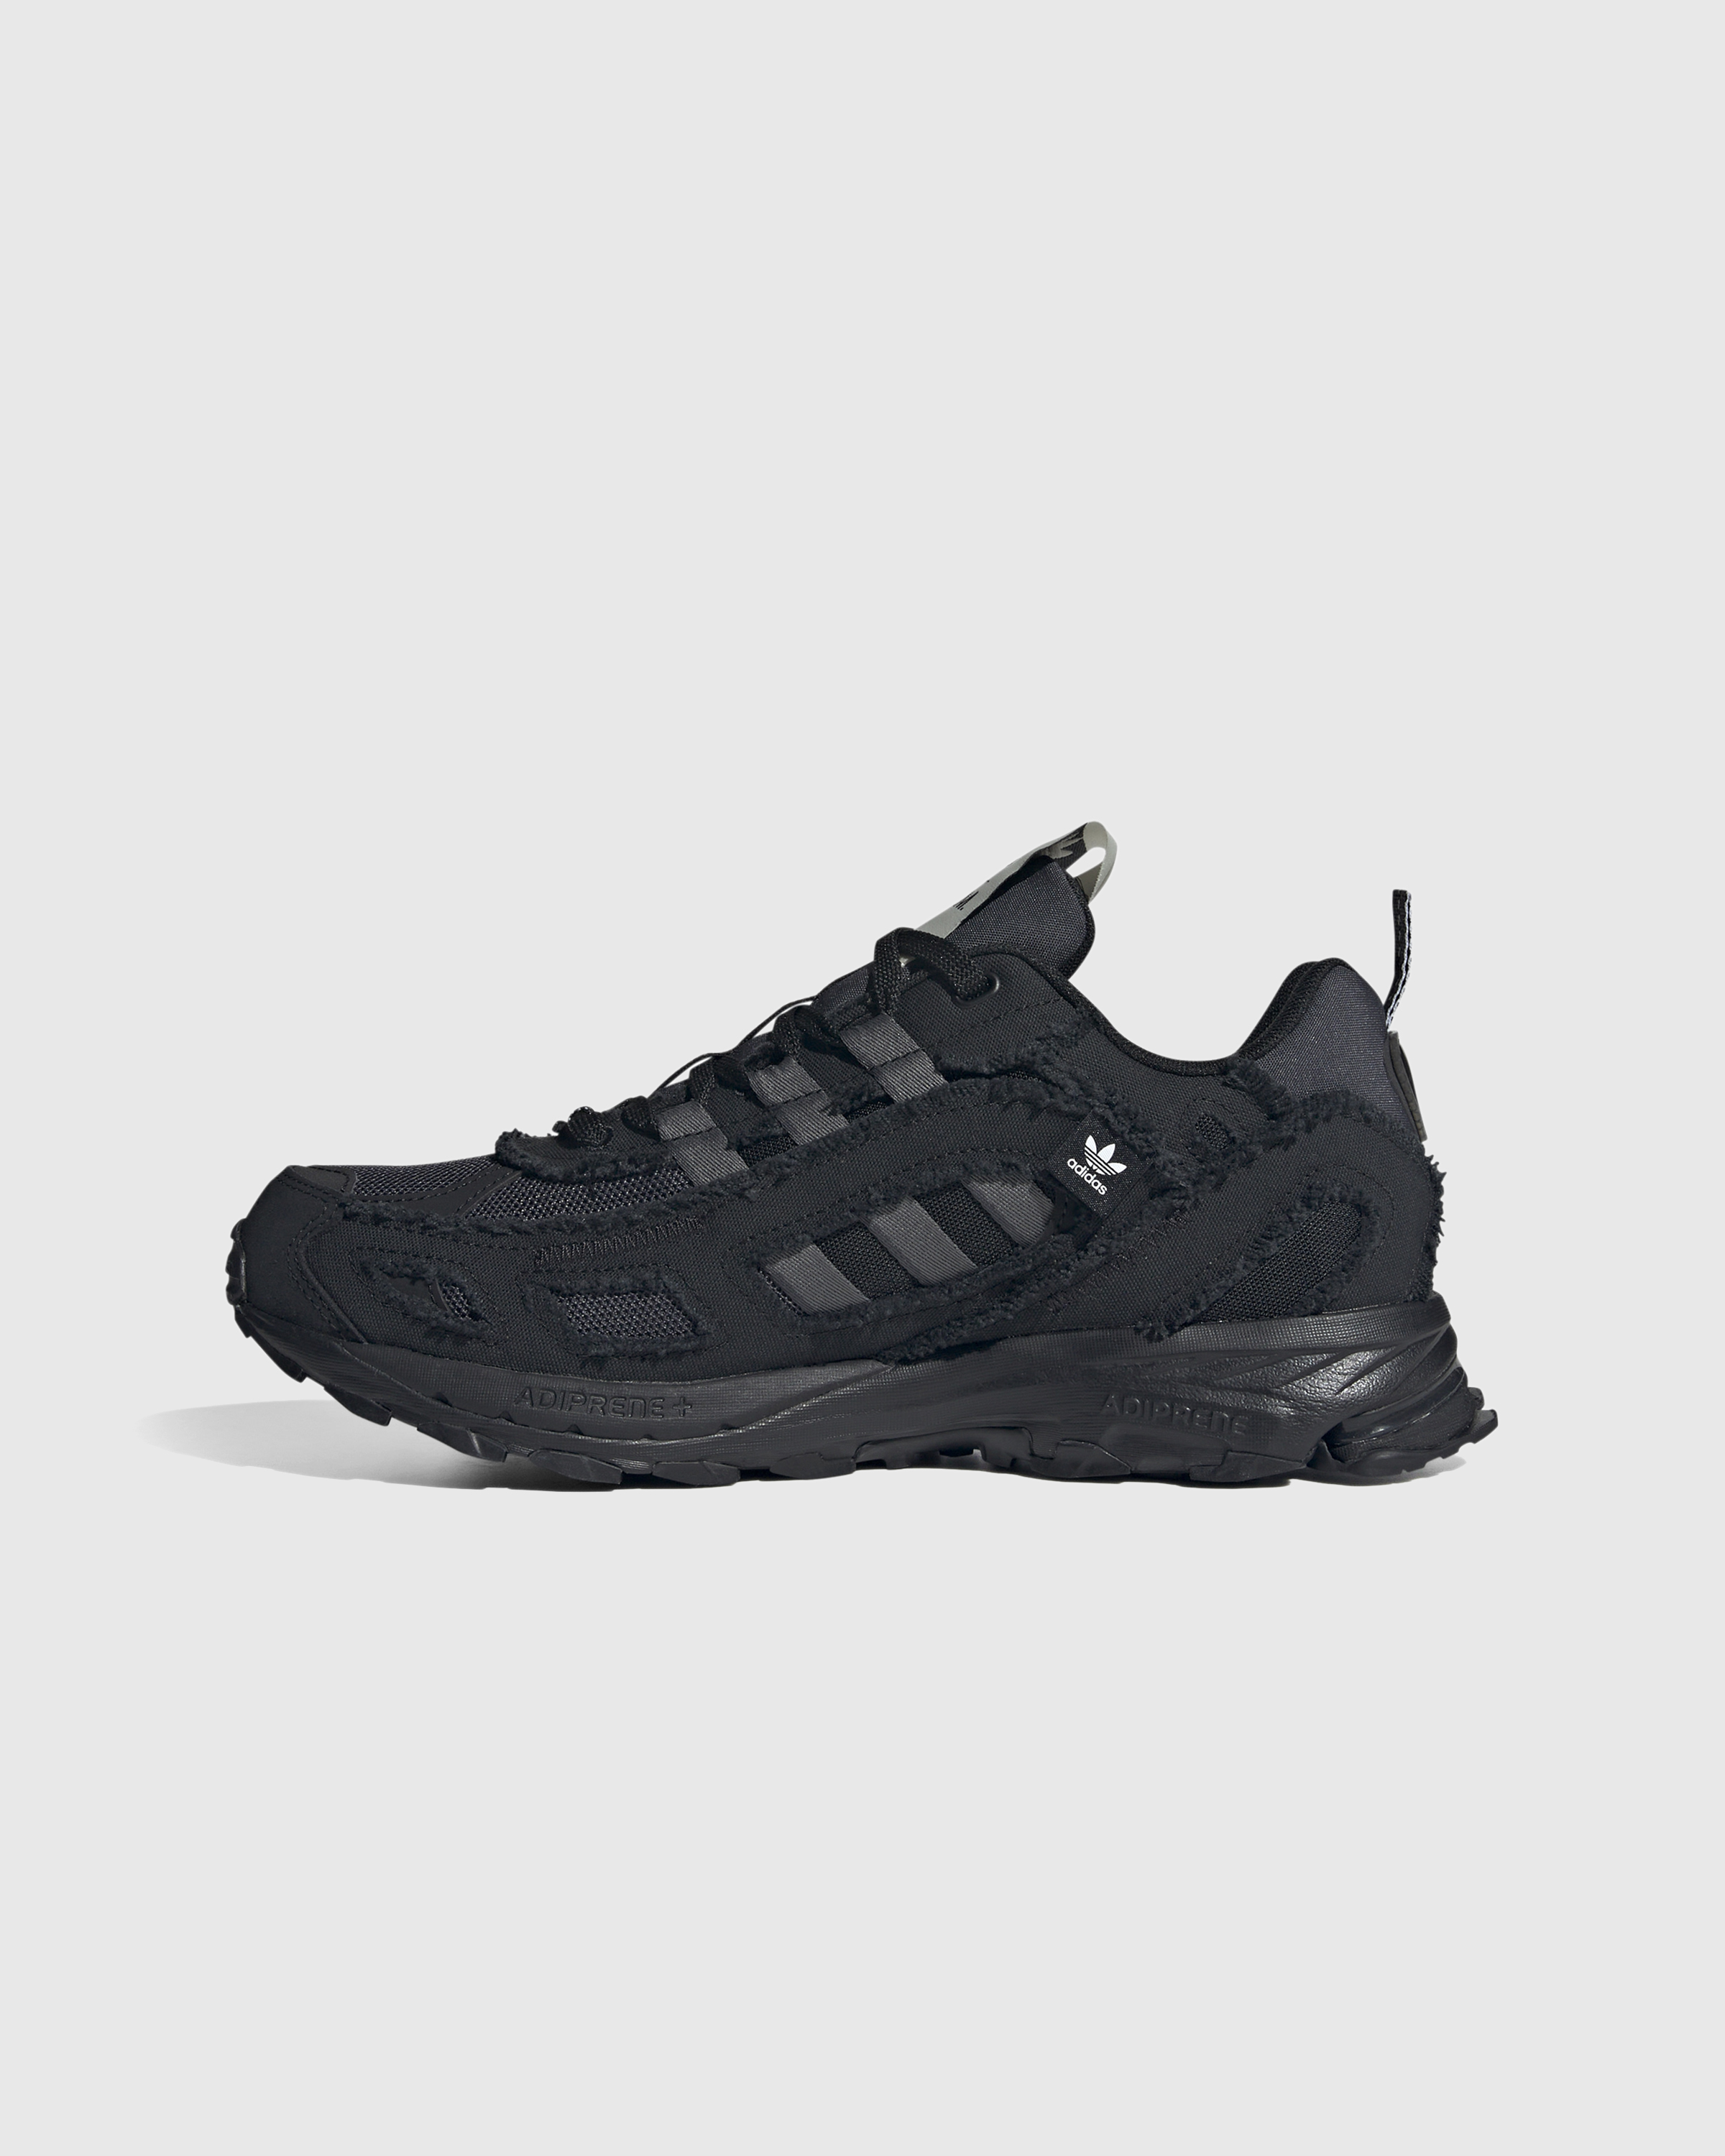 Adidas x Song For The Mute – Shadowturf SFTM-003 Core Black/Night Grey/Carbon - Low Top Sneakers - Black - Image 2